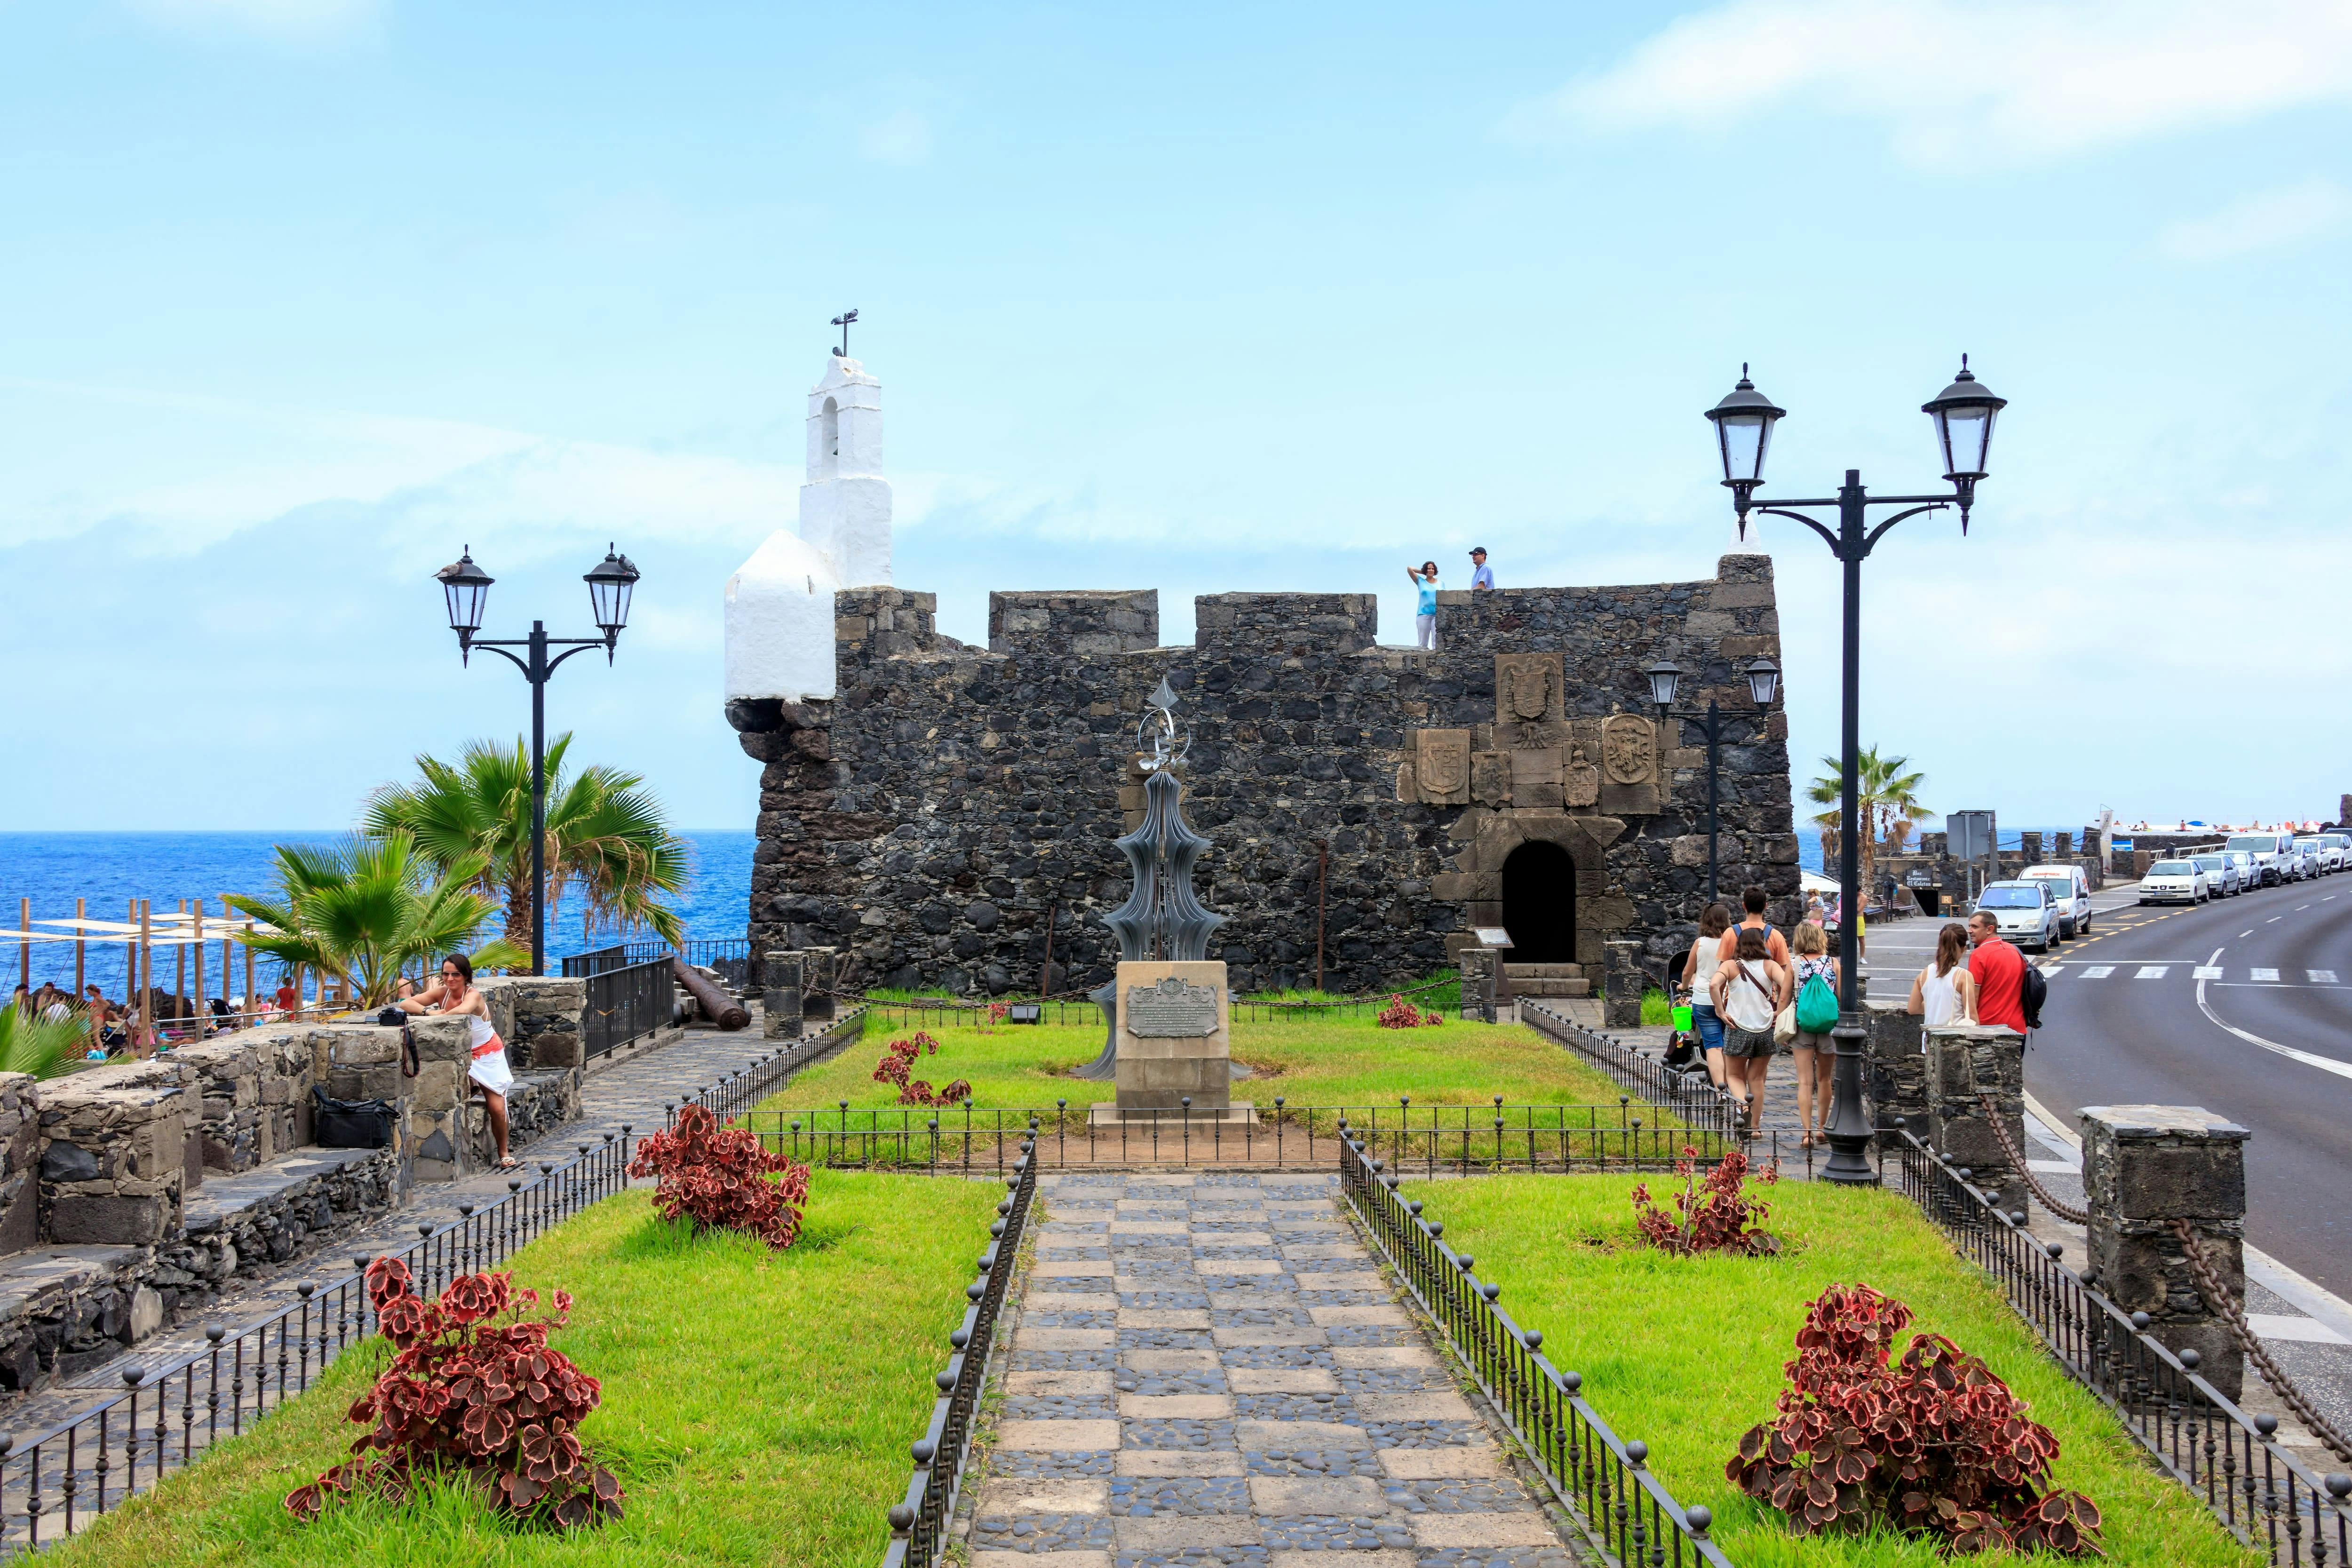 North-West Tenerife Hidden Secrets Guided Tour with Transport